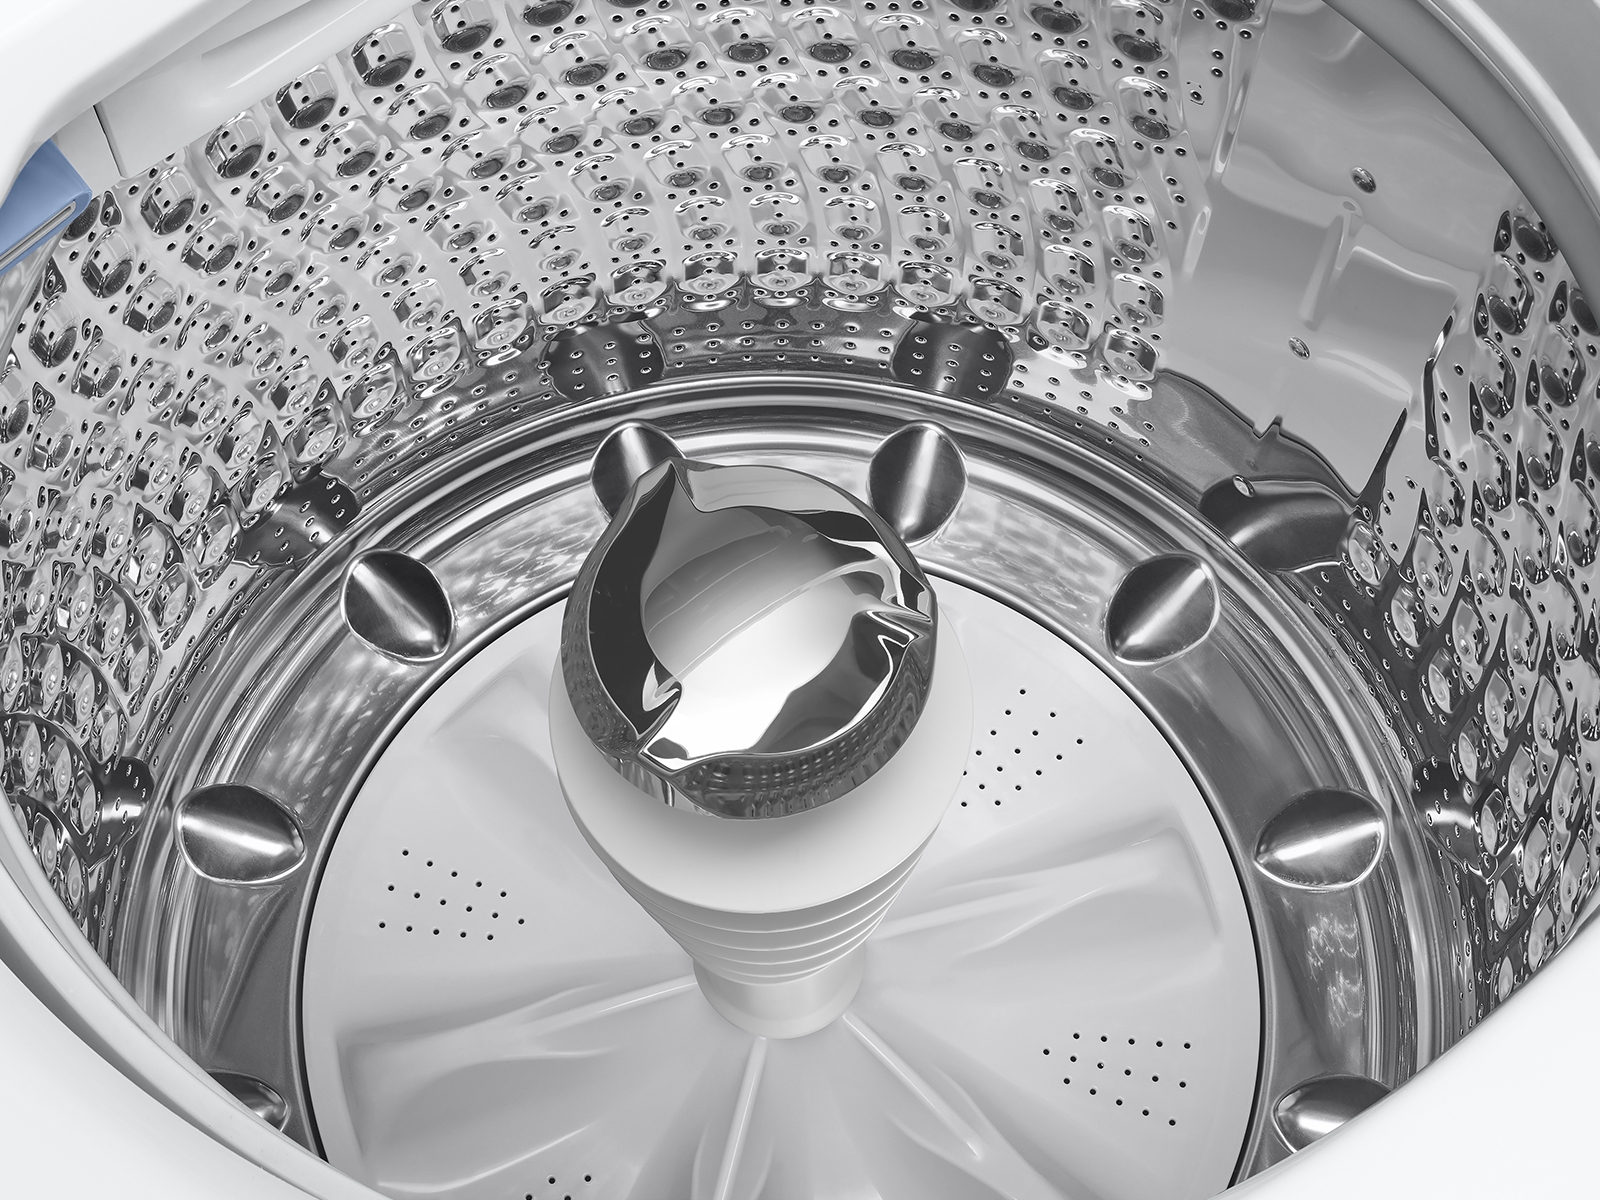 Thumbnail image of 5.4 cu. ft. Extra-Large Capacity Smart Top Load Washer with ActiveWave&trade; Agitator and Super Speed Wash in White